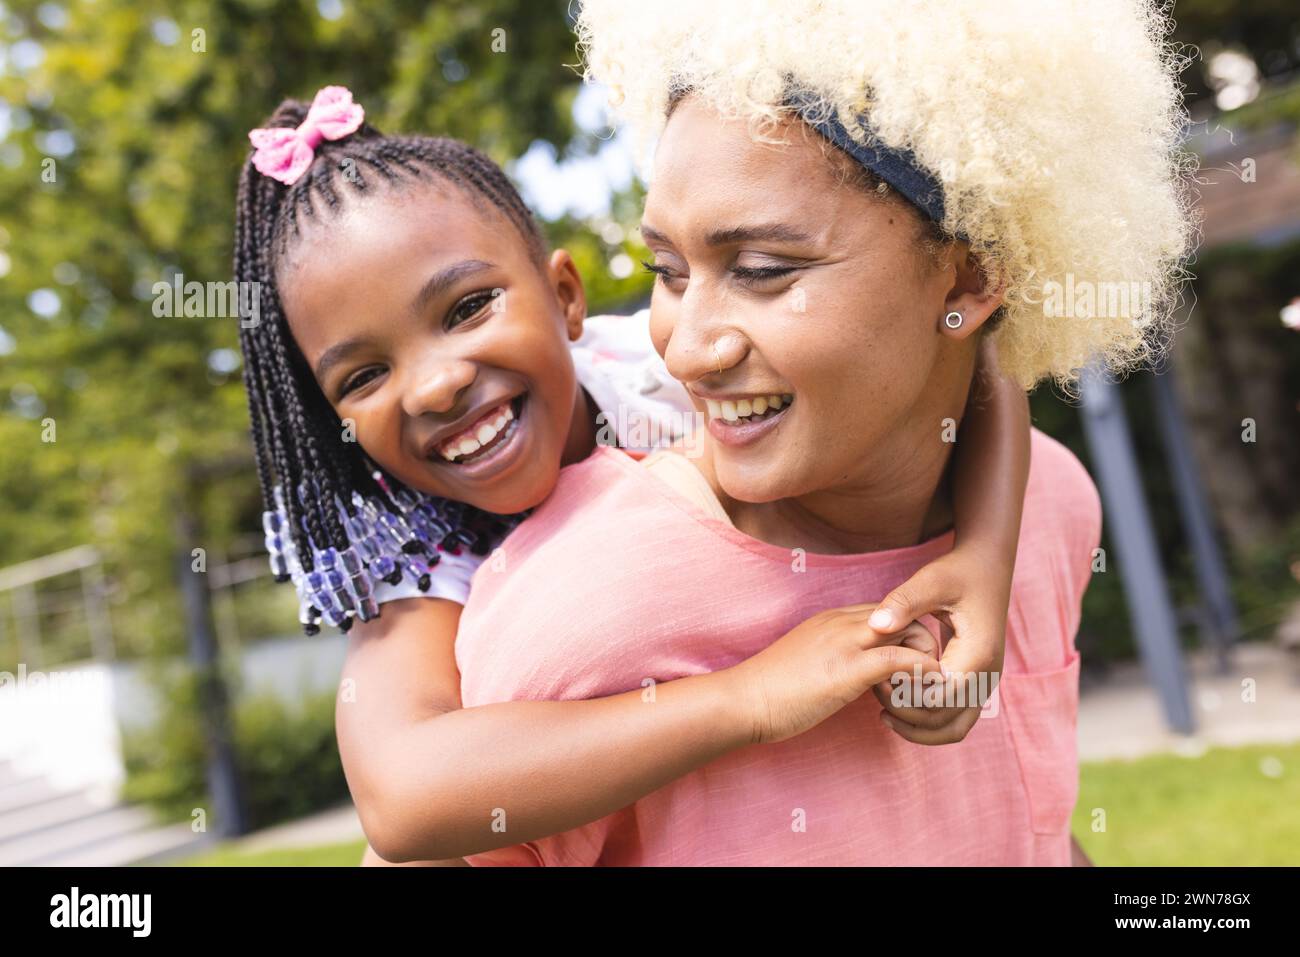 African American daughter with braids and a bow smiles while piggybacking on a young biracial mother Stock Photo